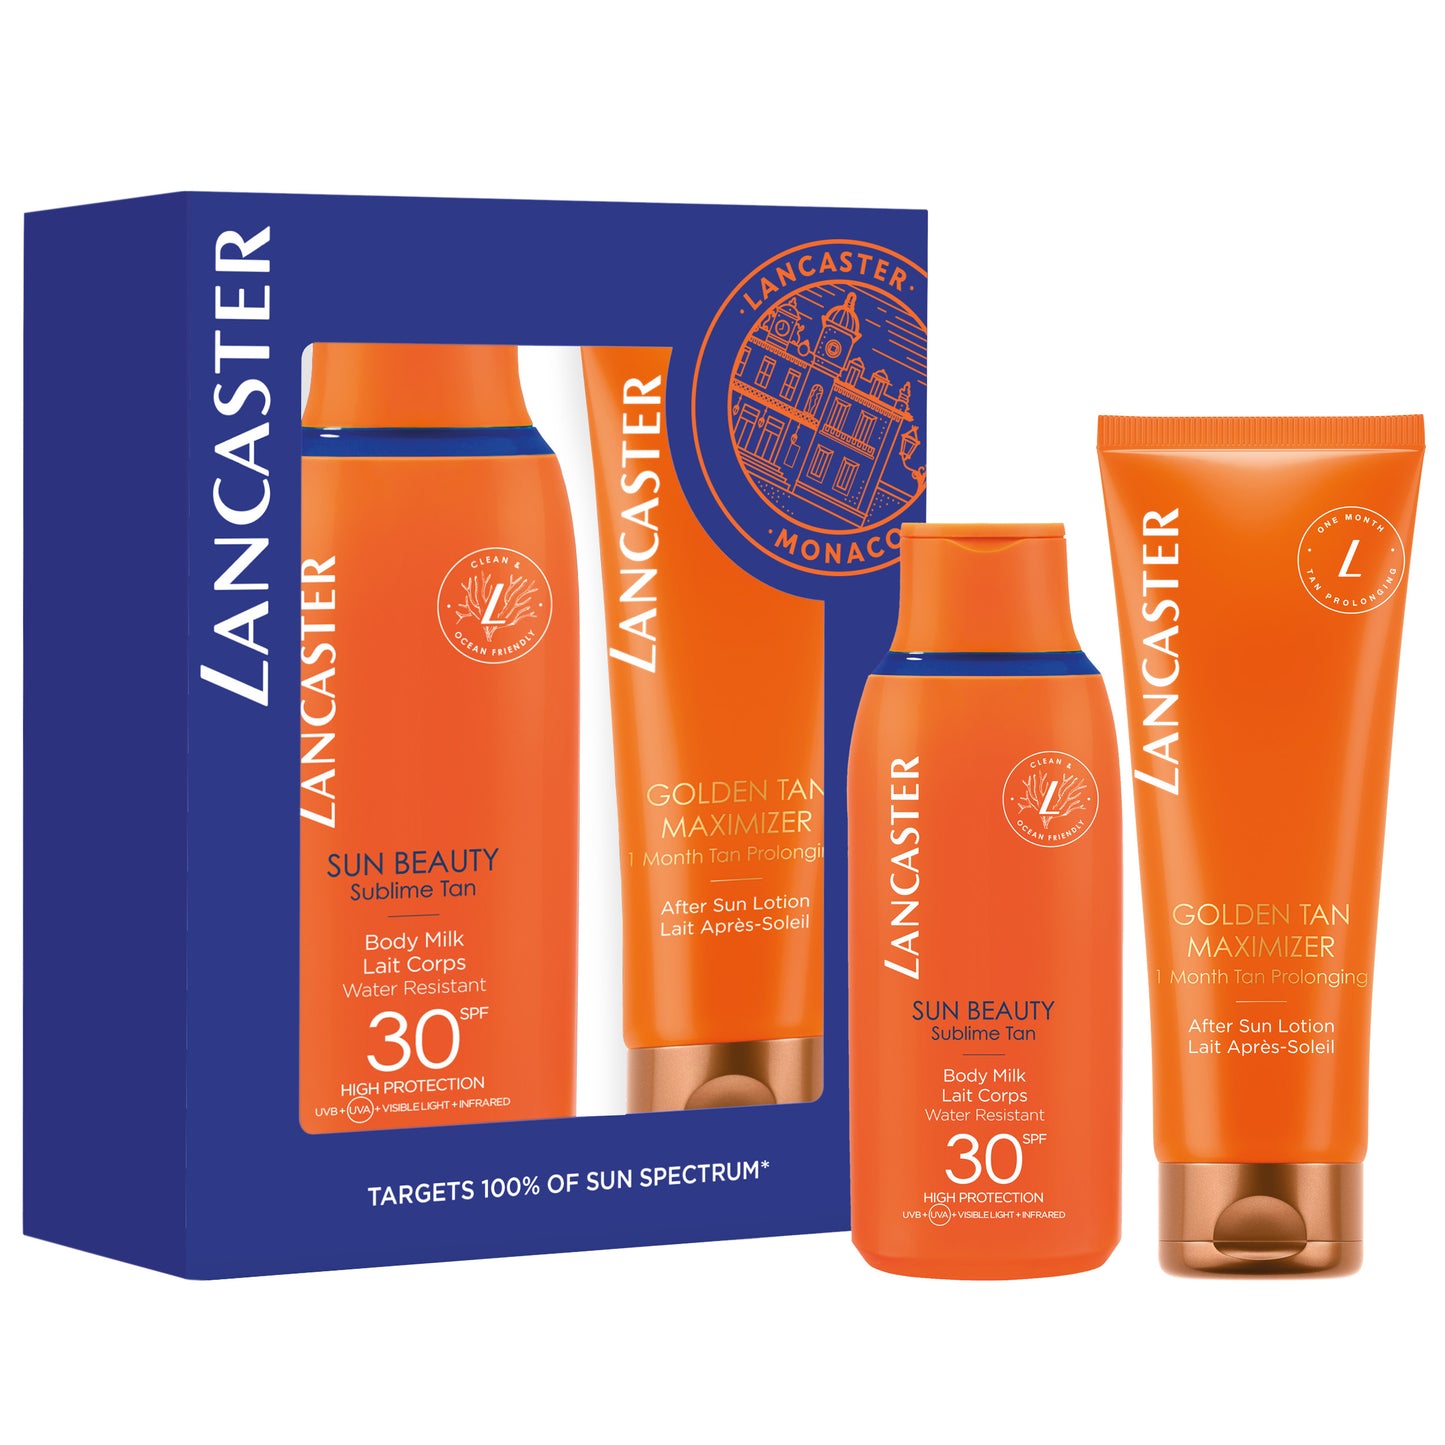 Your Sun Protection & Golden Tan Essentials SPF30